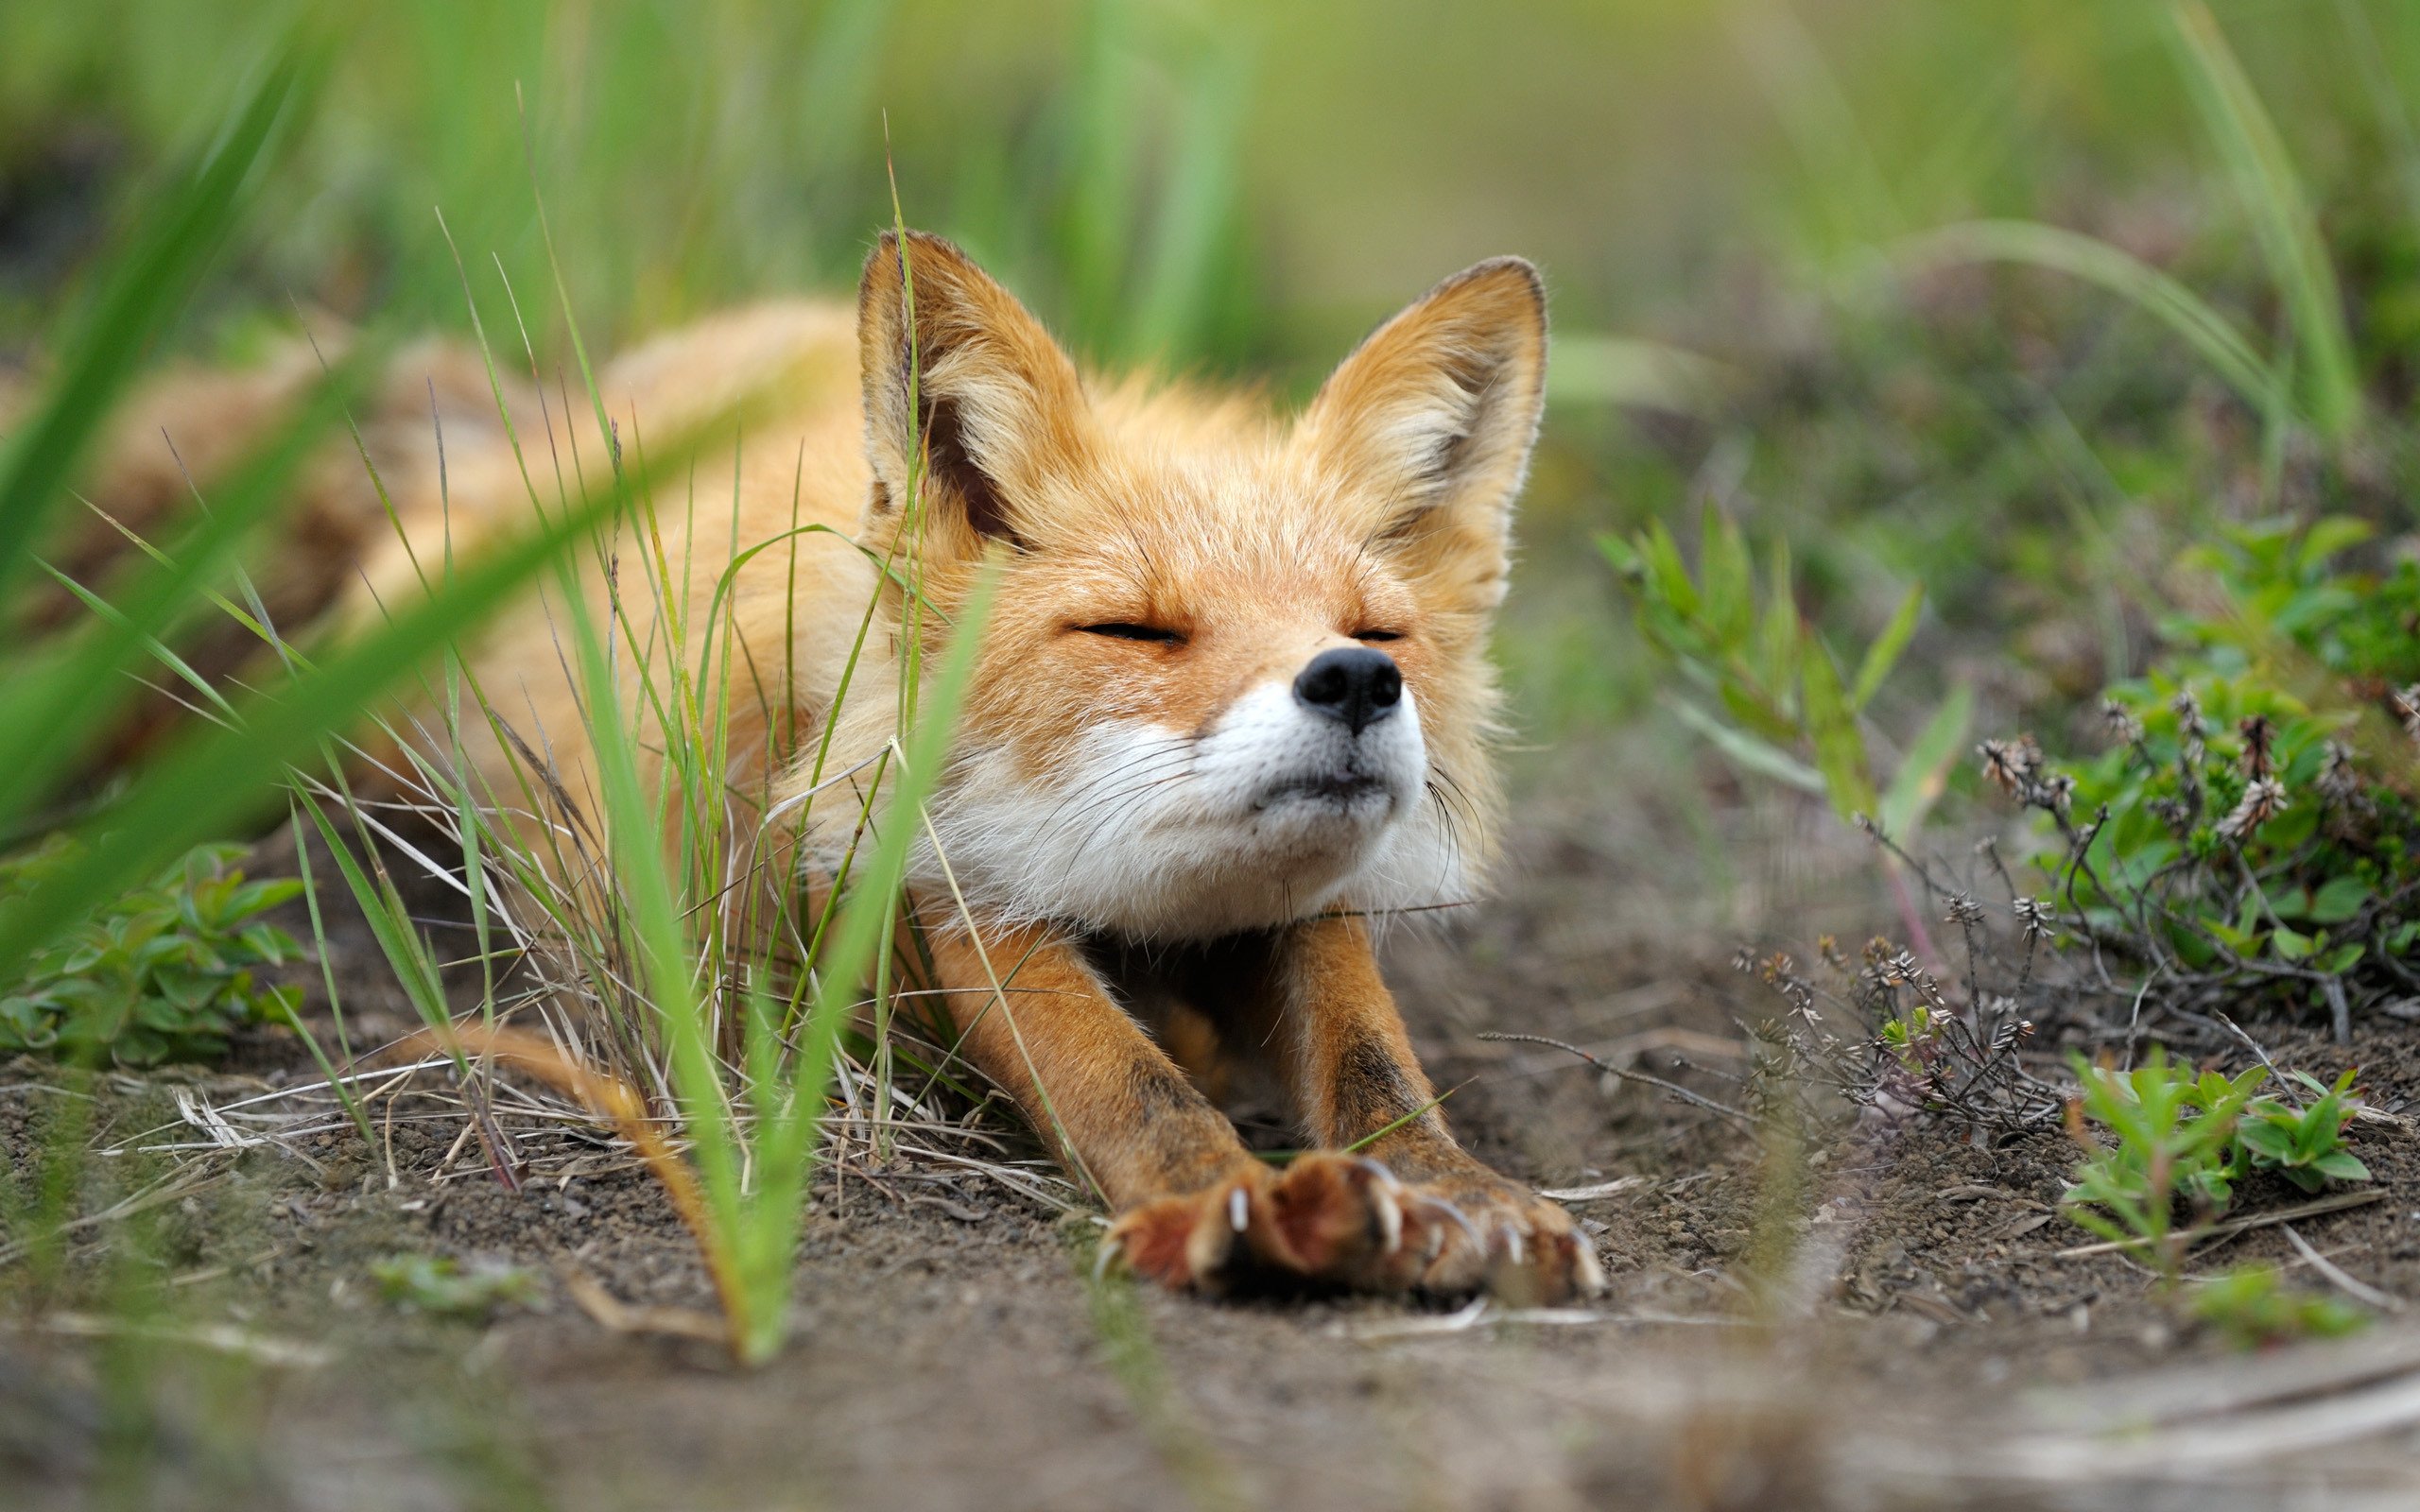 Cute Baby Fox Wallpaper images